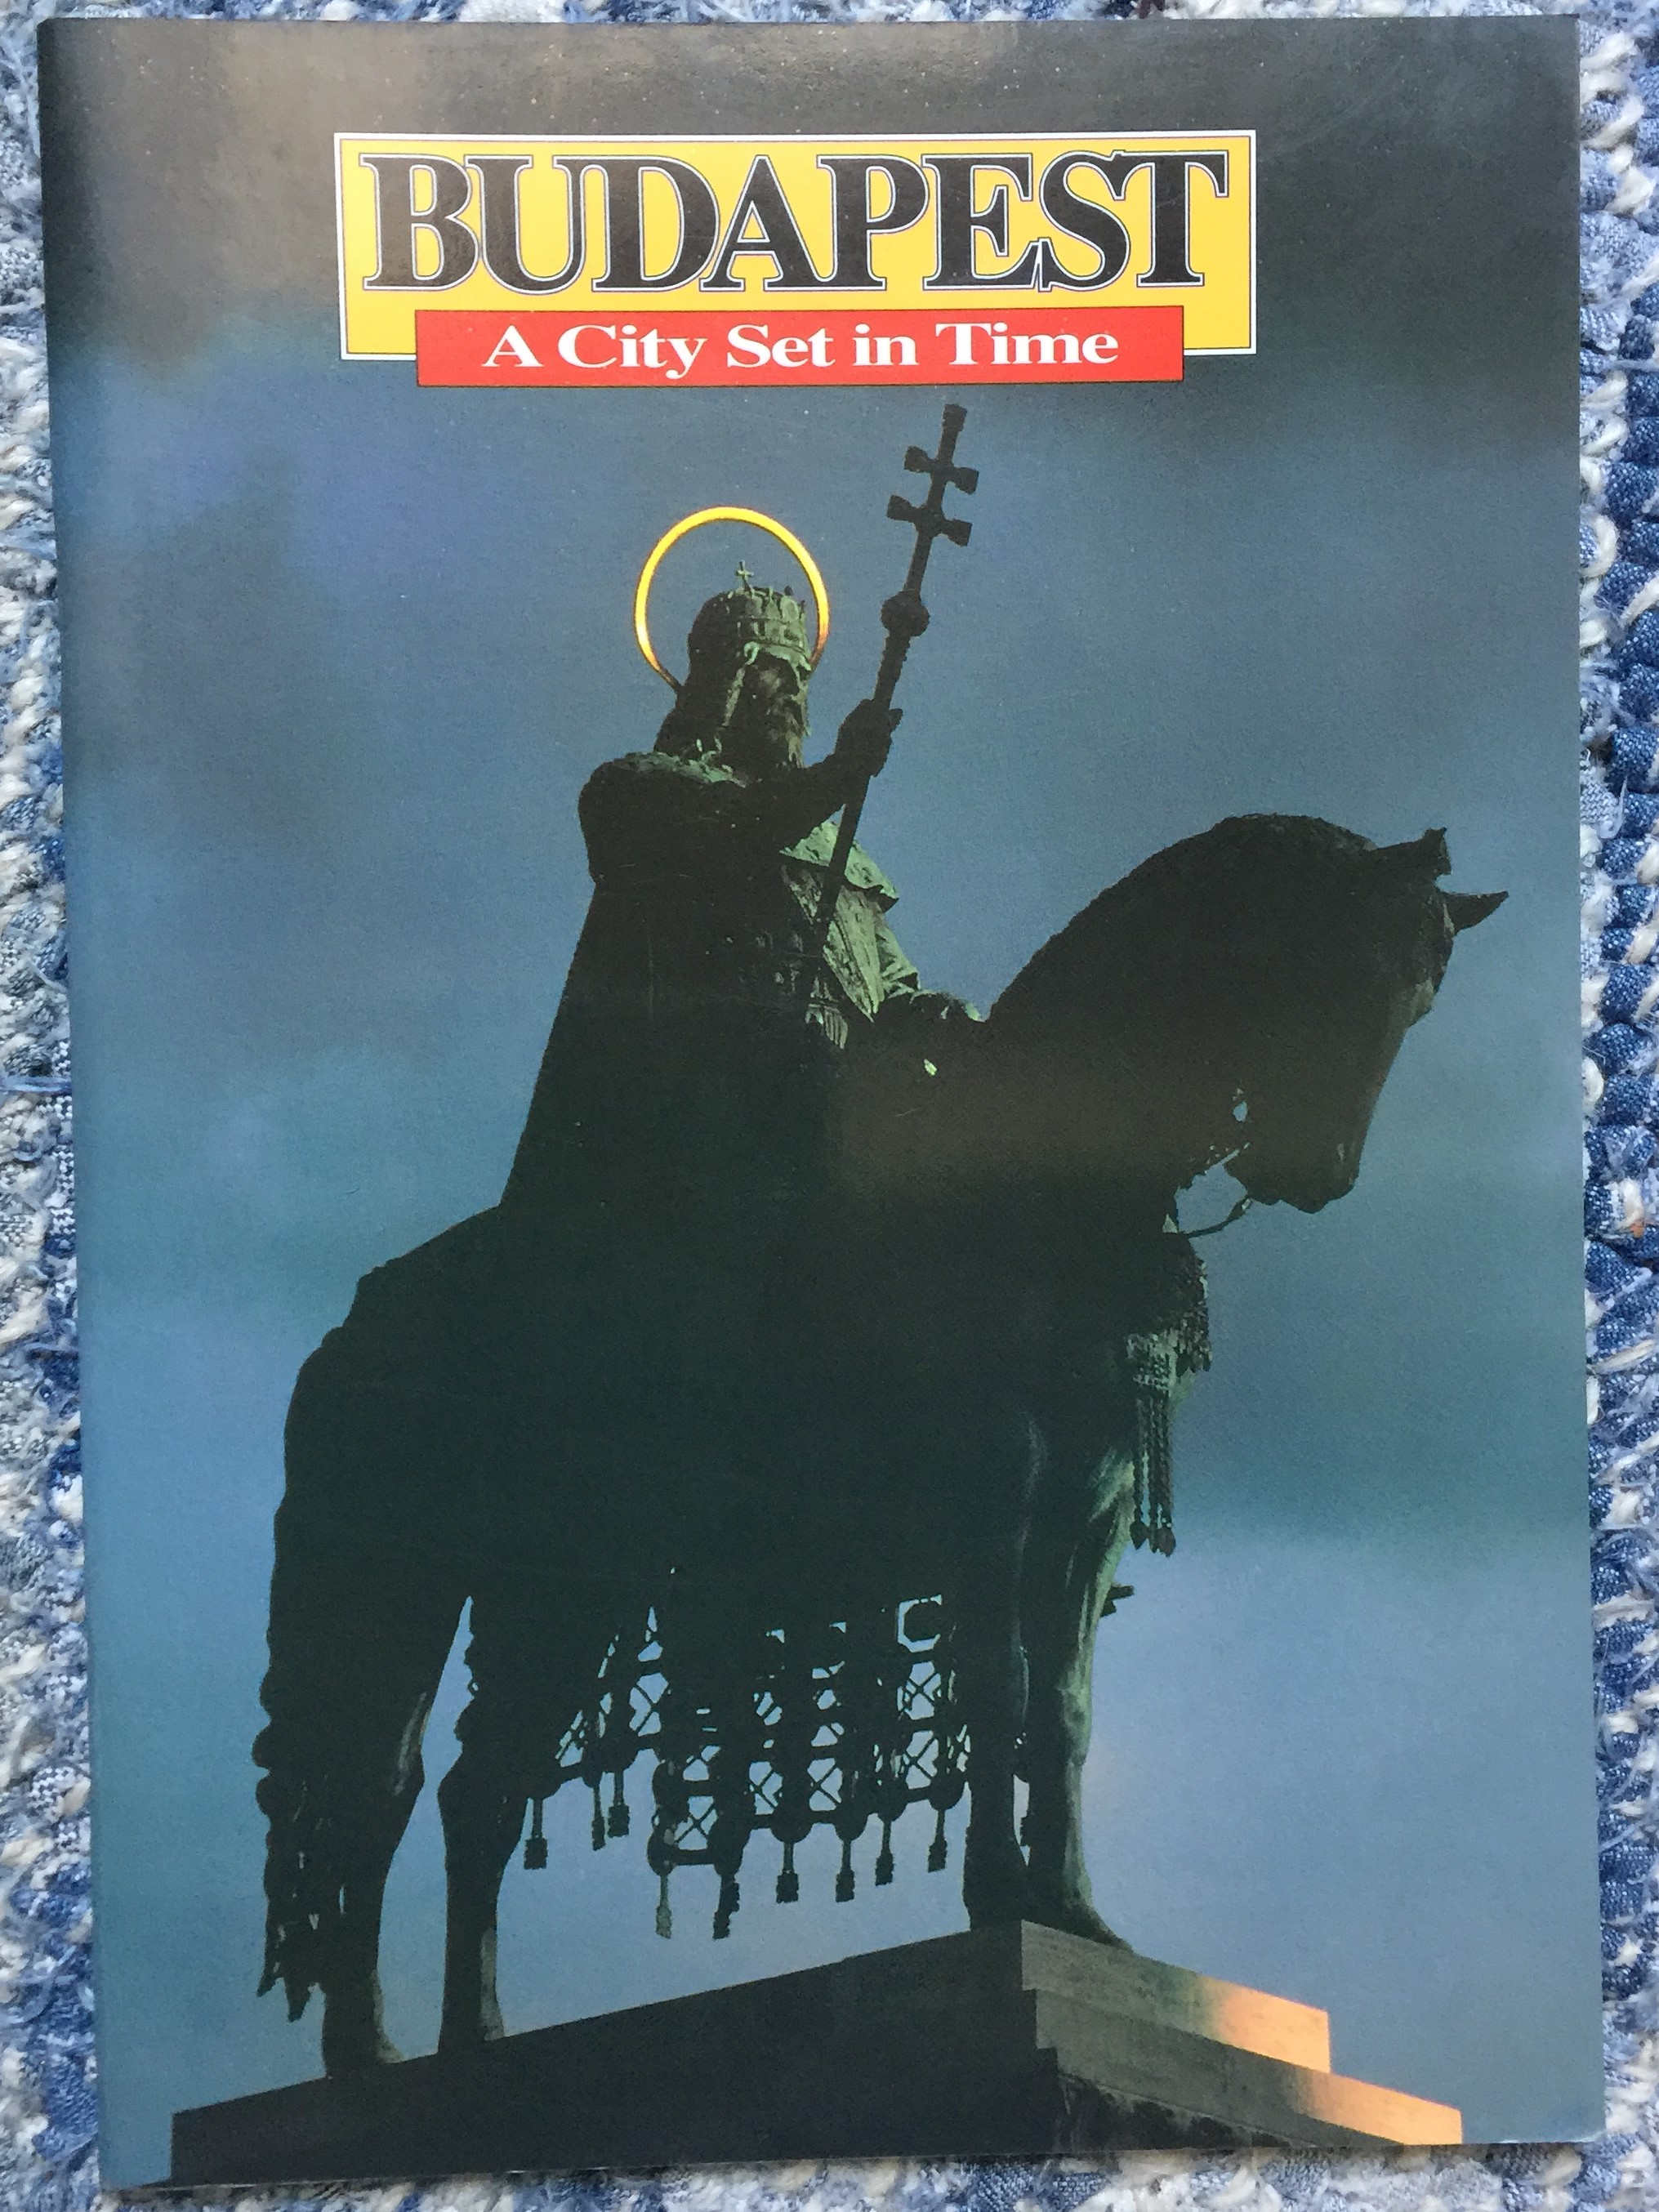 budapest-a-city-set-in-time-english-language-city-tour-booklet-of-the-hungarian-capital-1.jpg